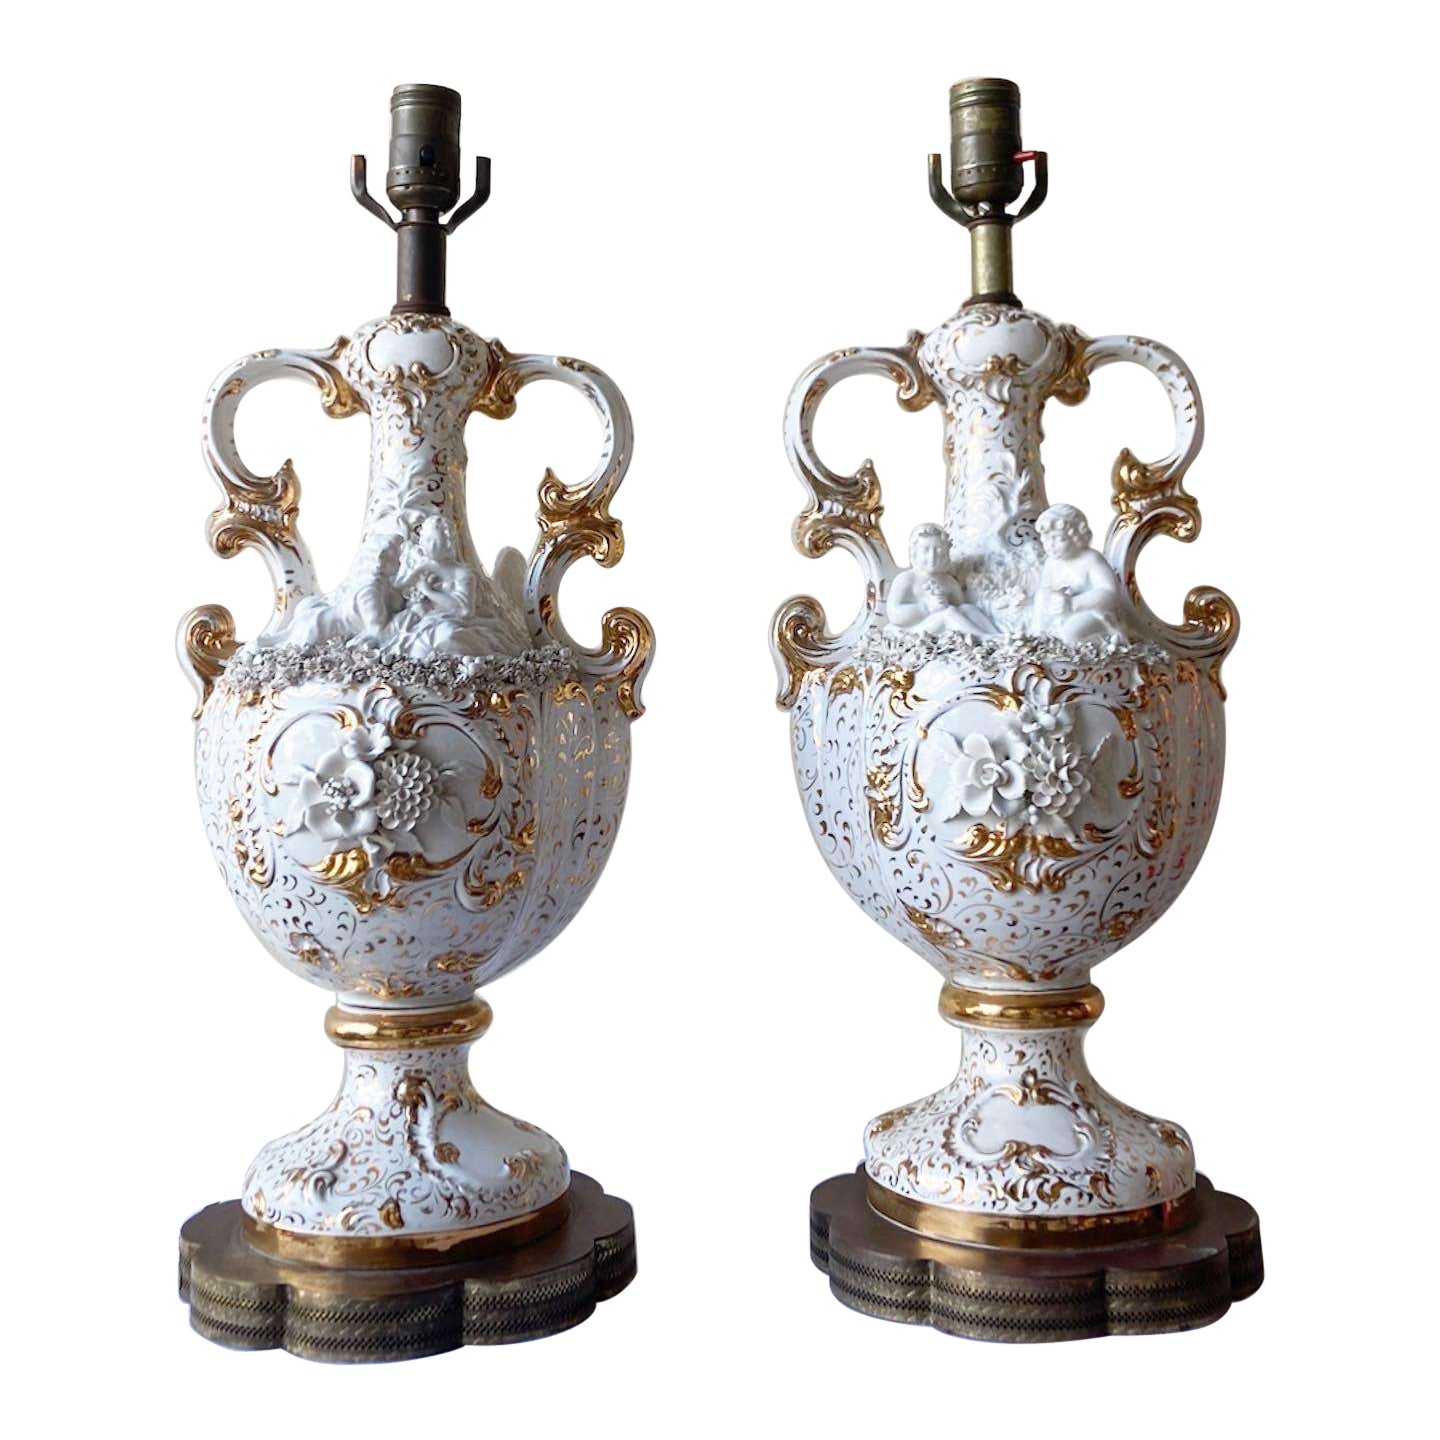 Vintage Ceramic White and Gold Cherub Trophy Table Lamps - a Pair